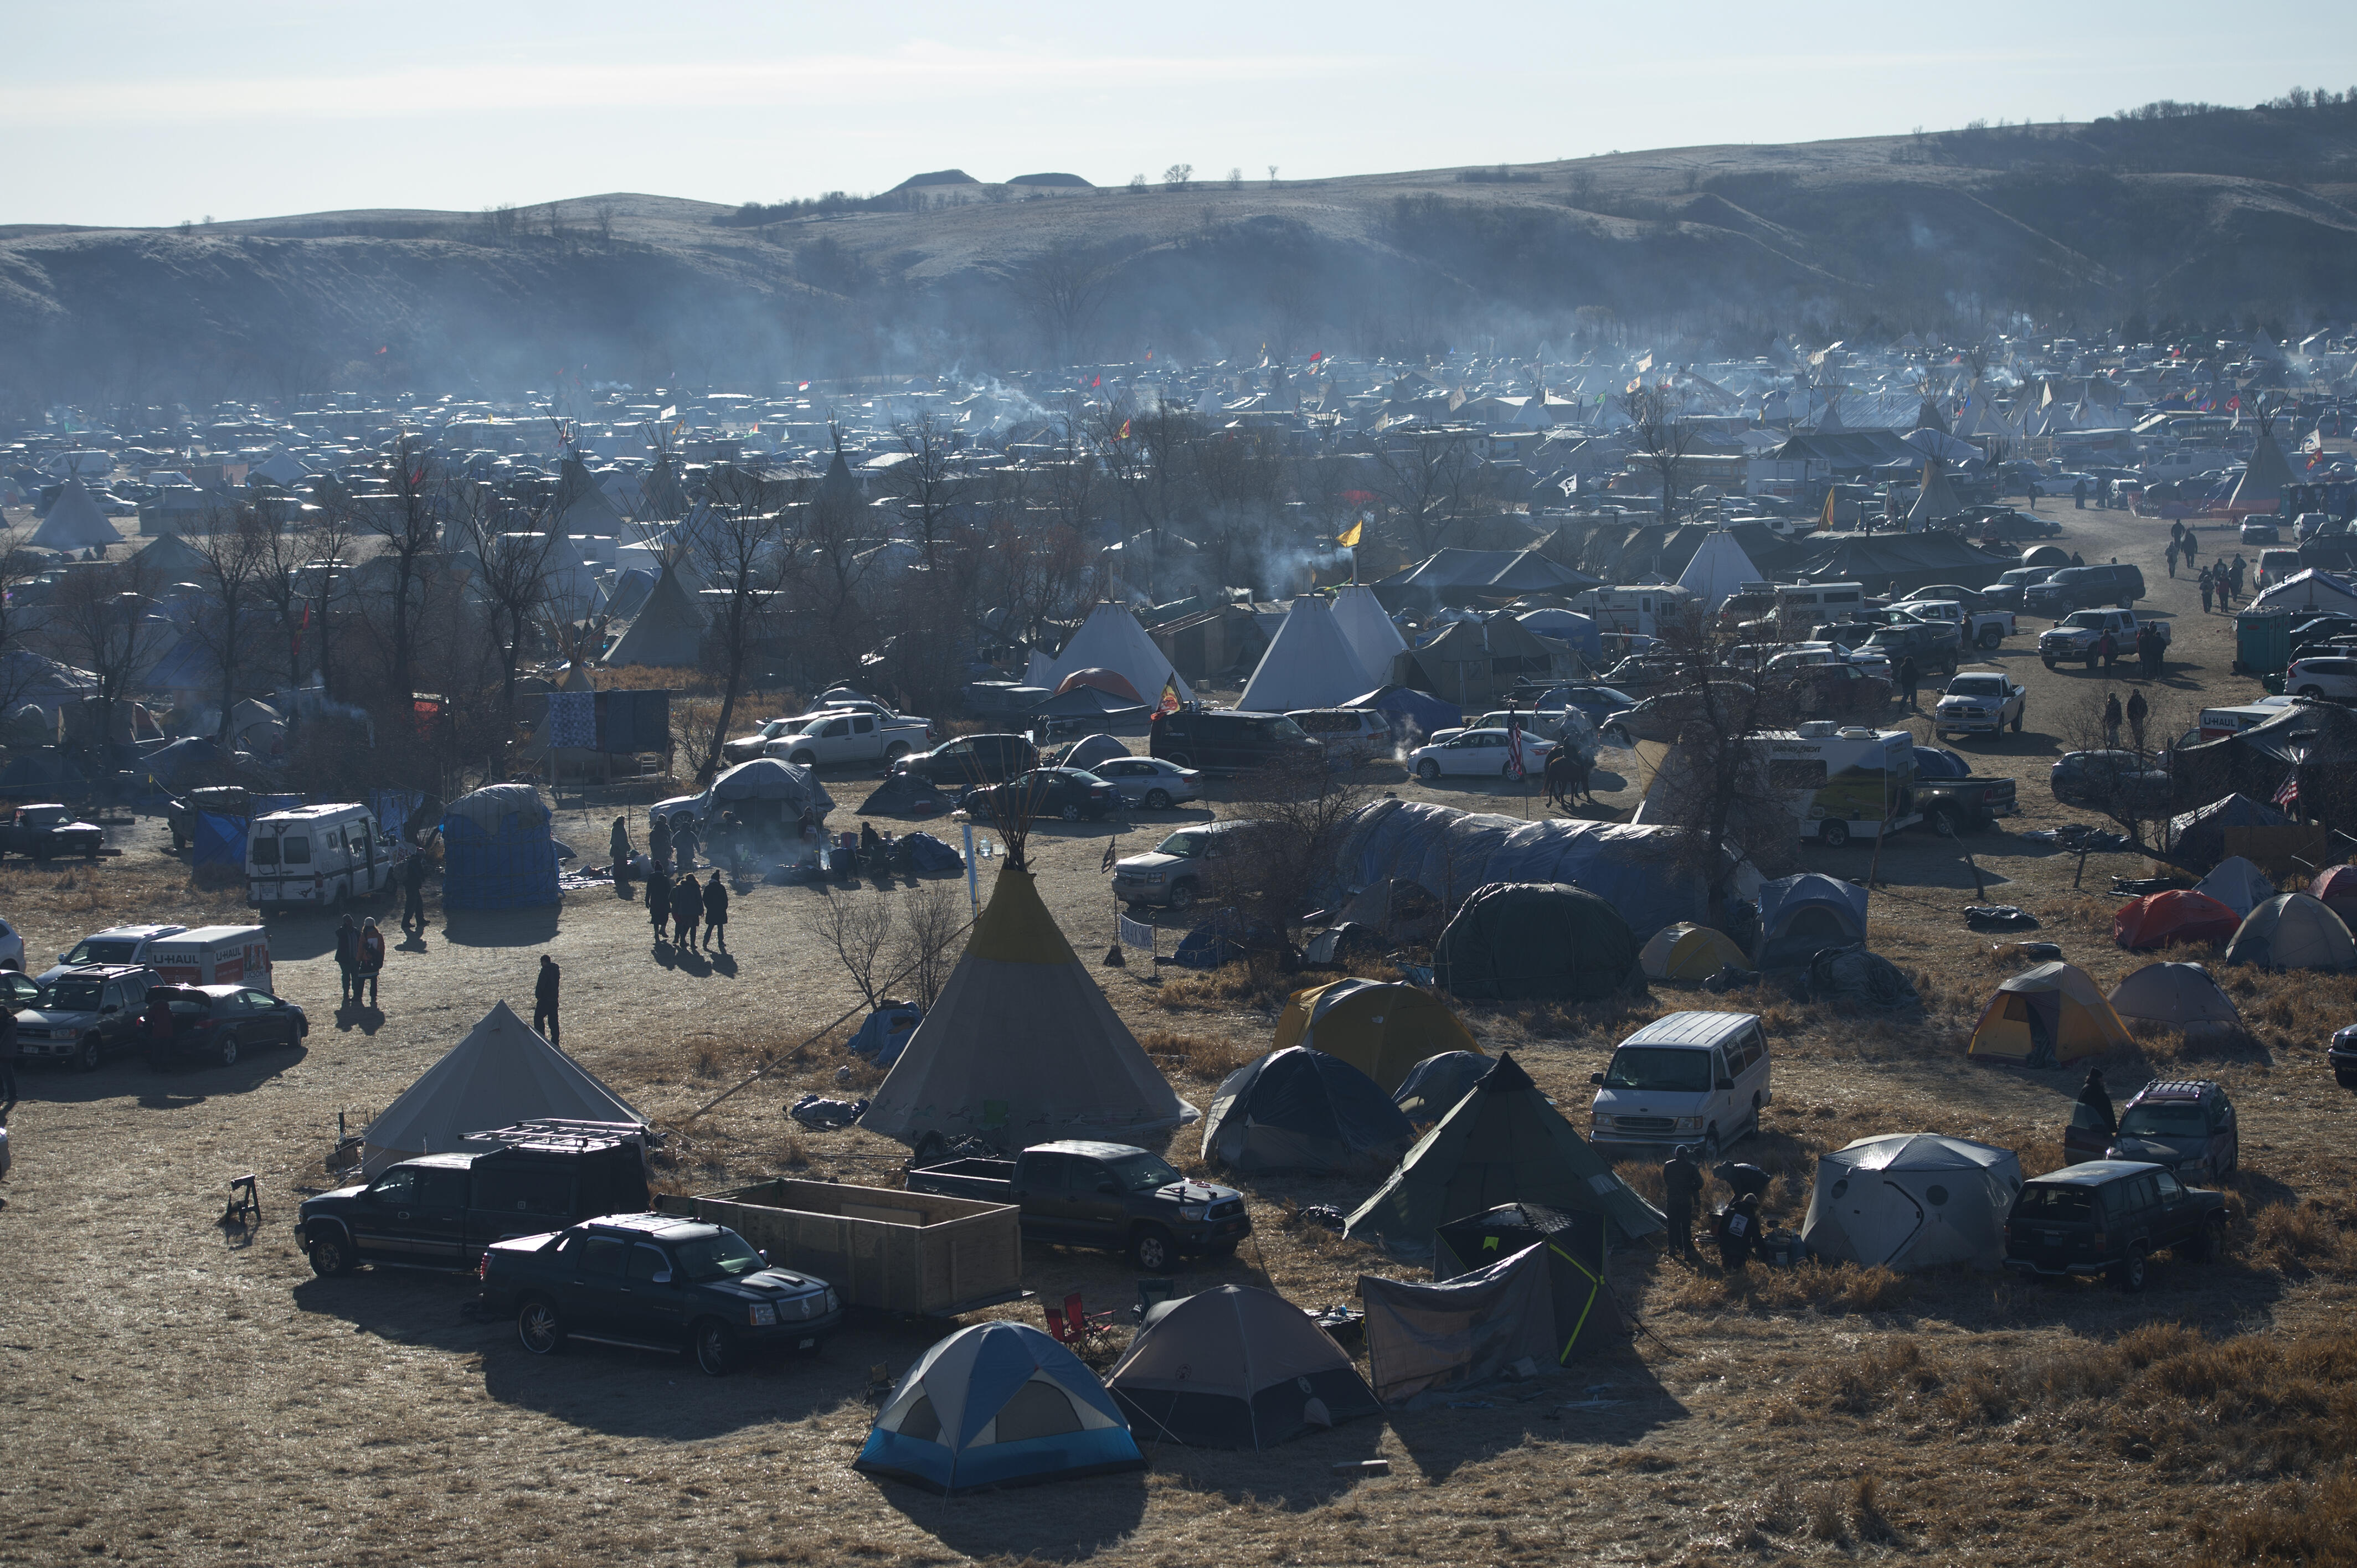 CANON BALL, ND - NOVEMBER 26: The Oceti Sakowin Camp on the Standing Rock Sioux Reservation in Canon Ball, North Dakota on November 26, 2016. The Army Corp of Engineers announced they will be removing the camp on December 5th on Saturday, displacing the e